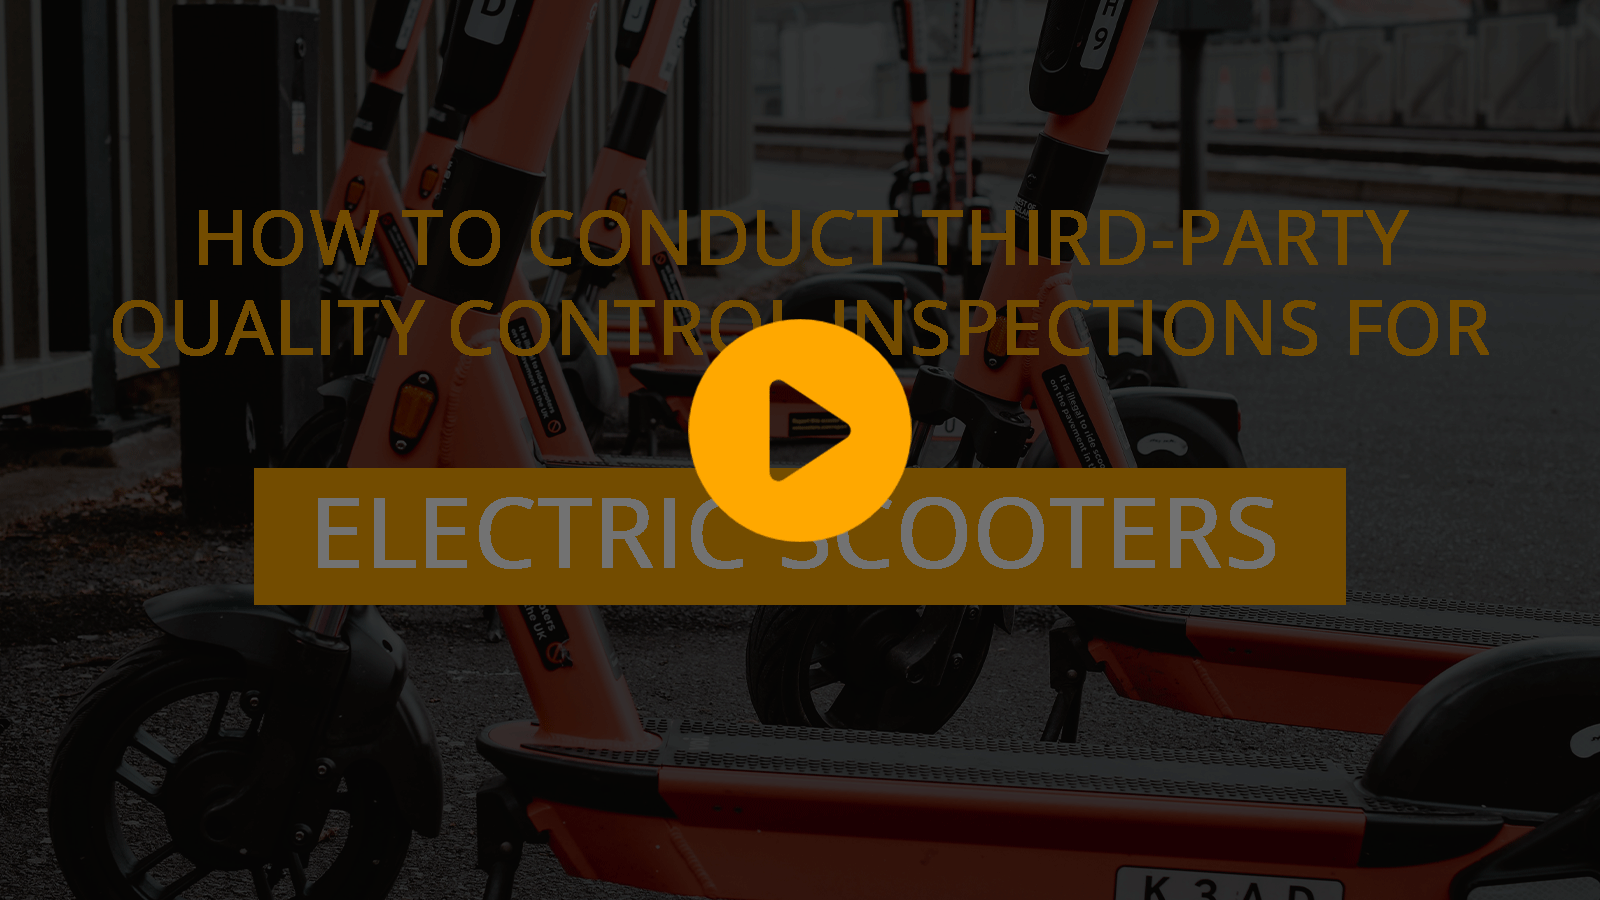 How-to-Conduct-Third-Party-Quality-Control-Inspections-for-Electric-Scooters